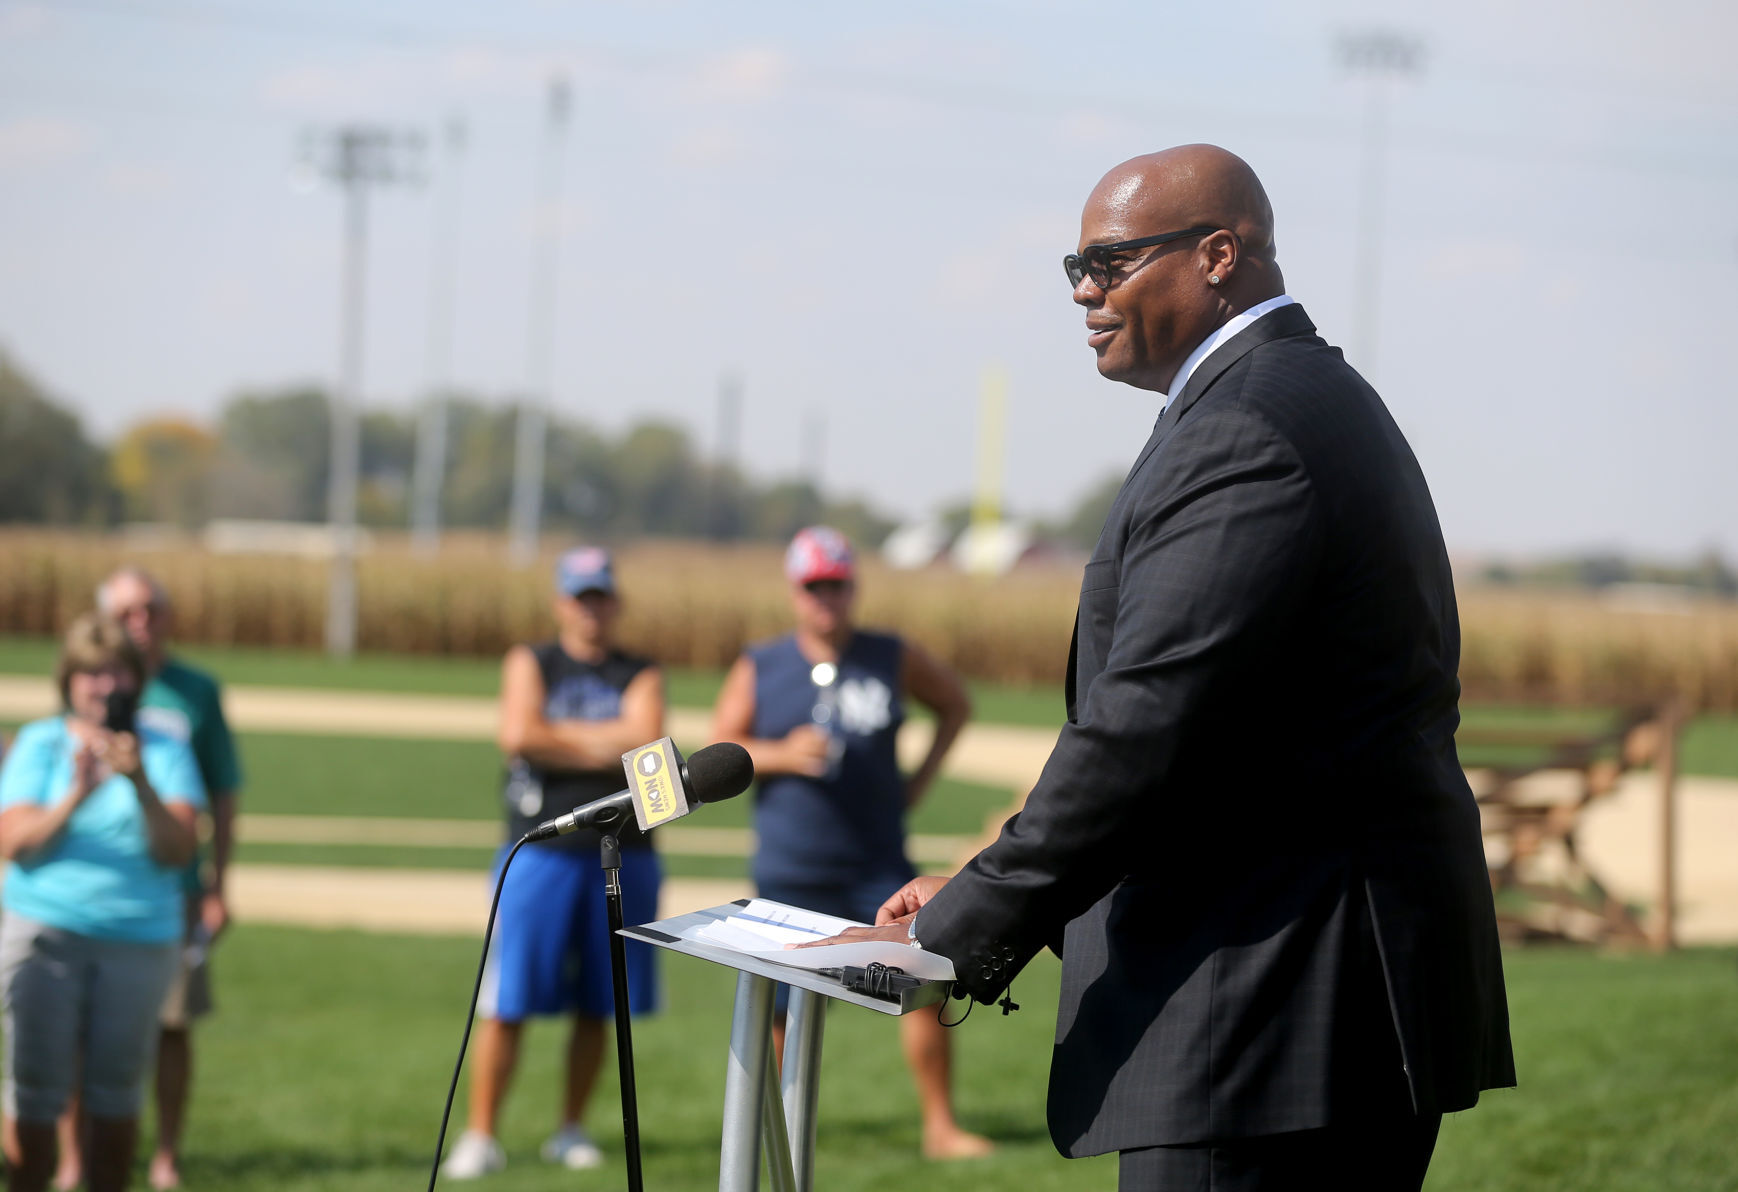 Baseball Hall of Famer Frank Thomas, who will serve as the CEO of Go the Distance Baseball, speaks during a press conference at the Field of Dreams in Dyersville, Iowa, on Thursday, Sept. 30, 2021.    PHOTO CREDIT: JESSICA REILLY